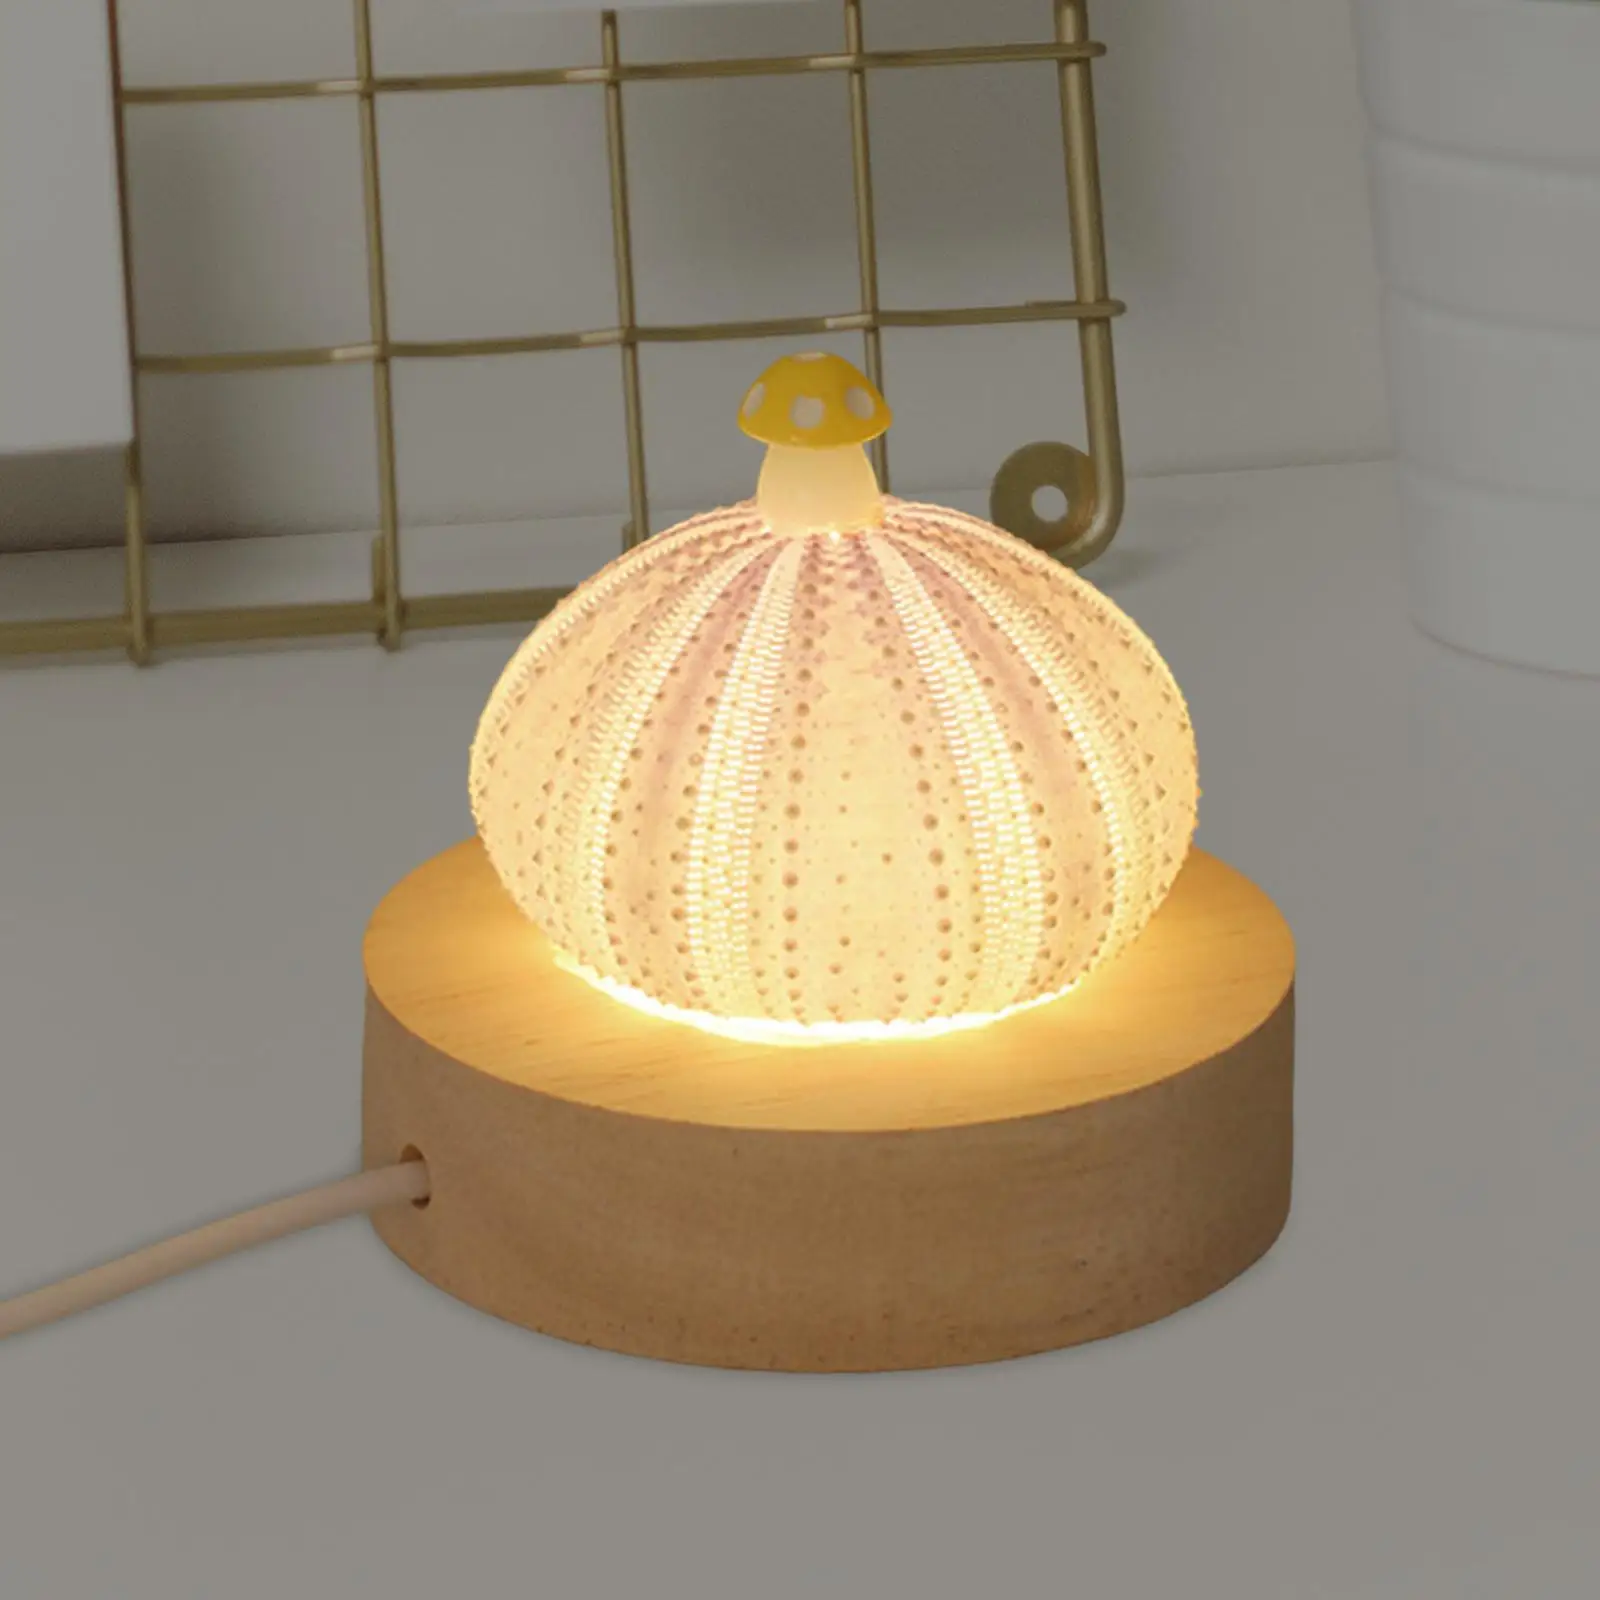 Decorative Table Lights Mini Desk Lamp Shell NightStand Bedside Lamp Wooden Base Party Desktop Birthday Gift Novelty Table Lamp